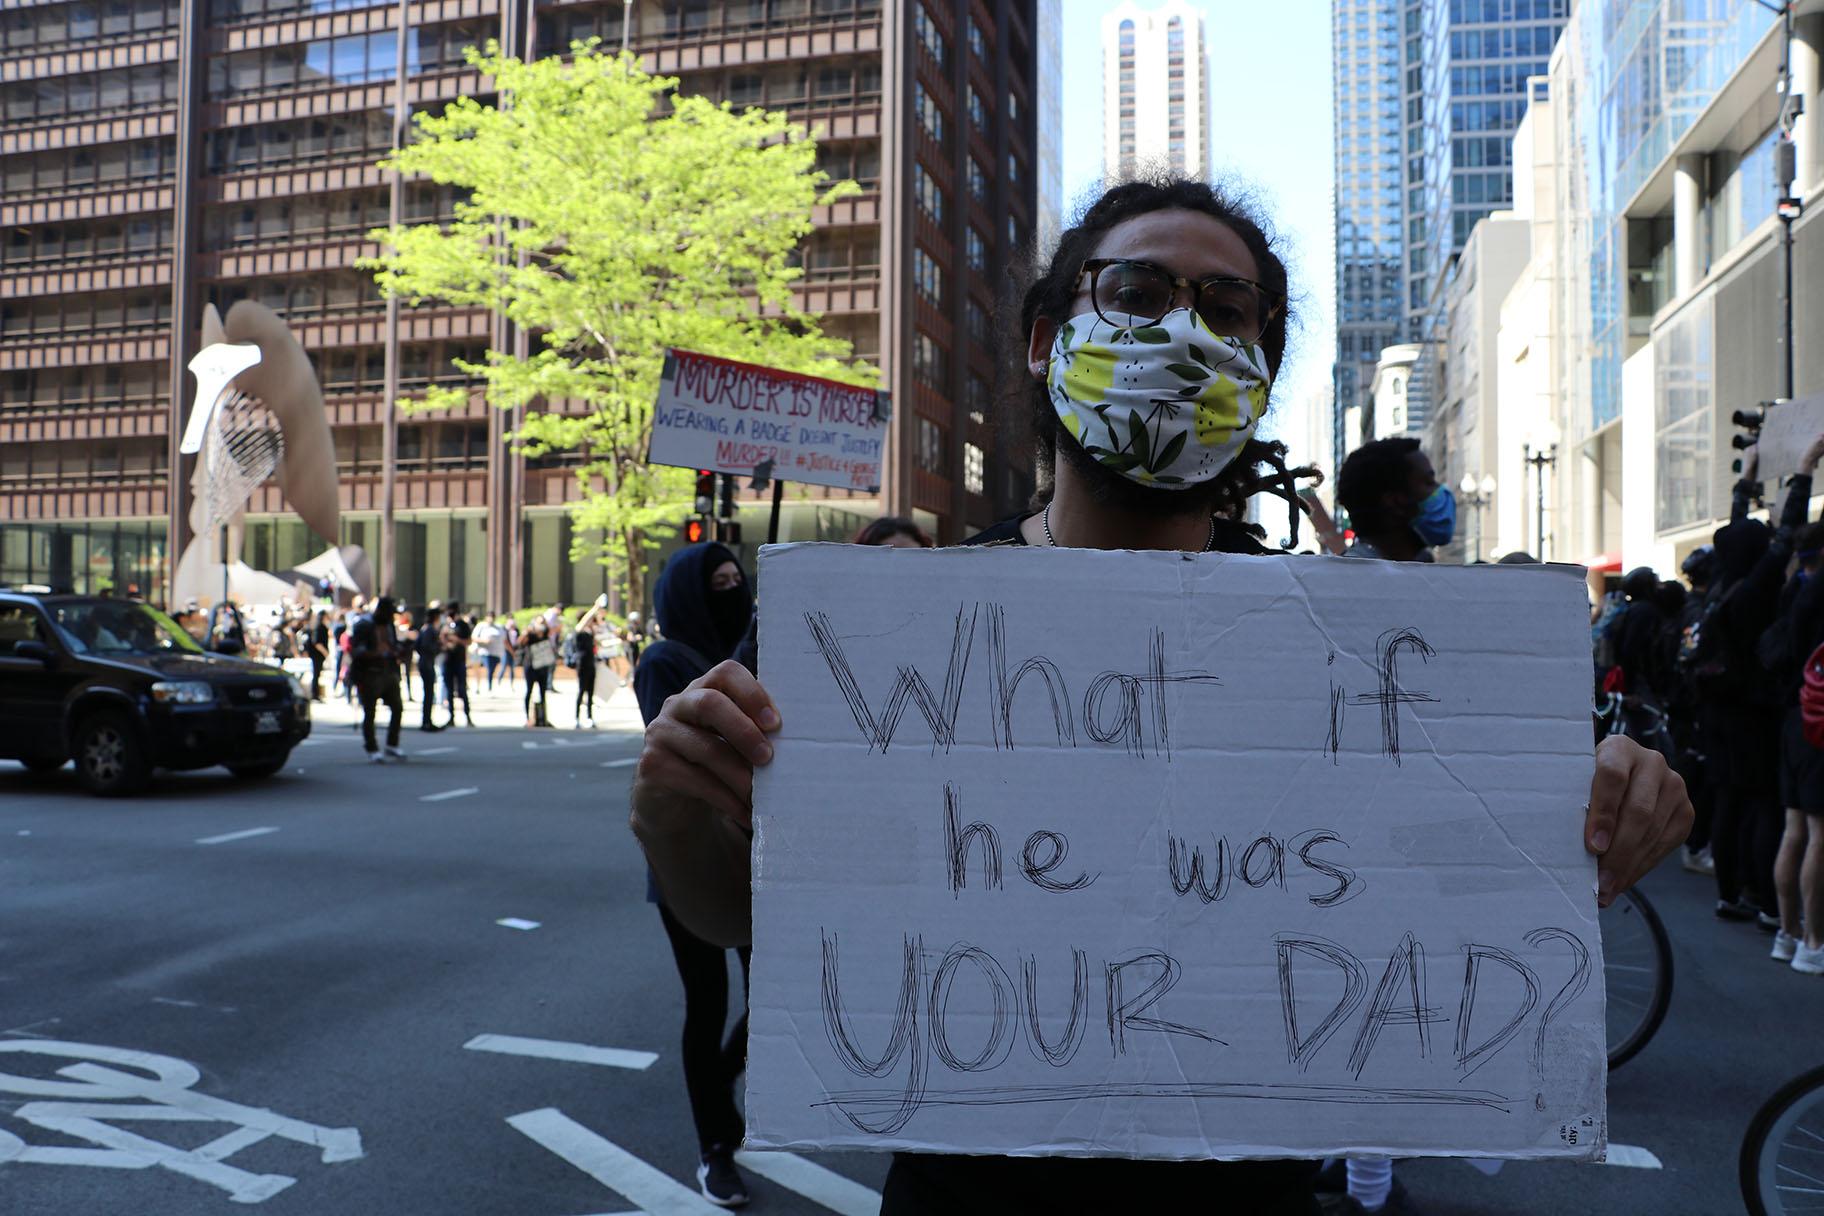 Donovan Walker, 33, of Chicago, holds a sign that reads: “What if he was YOUR DAD?: Walker said he lost his father 10 years ago. “When George [Floyd] got killed, I felt like another family member of mine got killed – and that cut me deep,” Walker said. “This one hurts a little more – I feel like I saw a modern-day lynching and that doesn’t feel good at all.” (Evan Garcia / WTTW News)